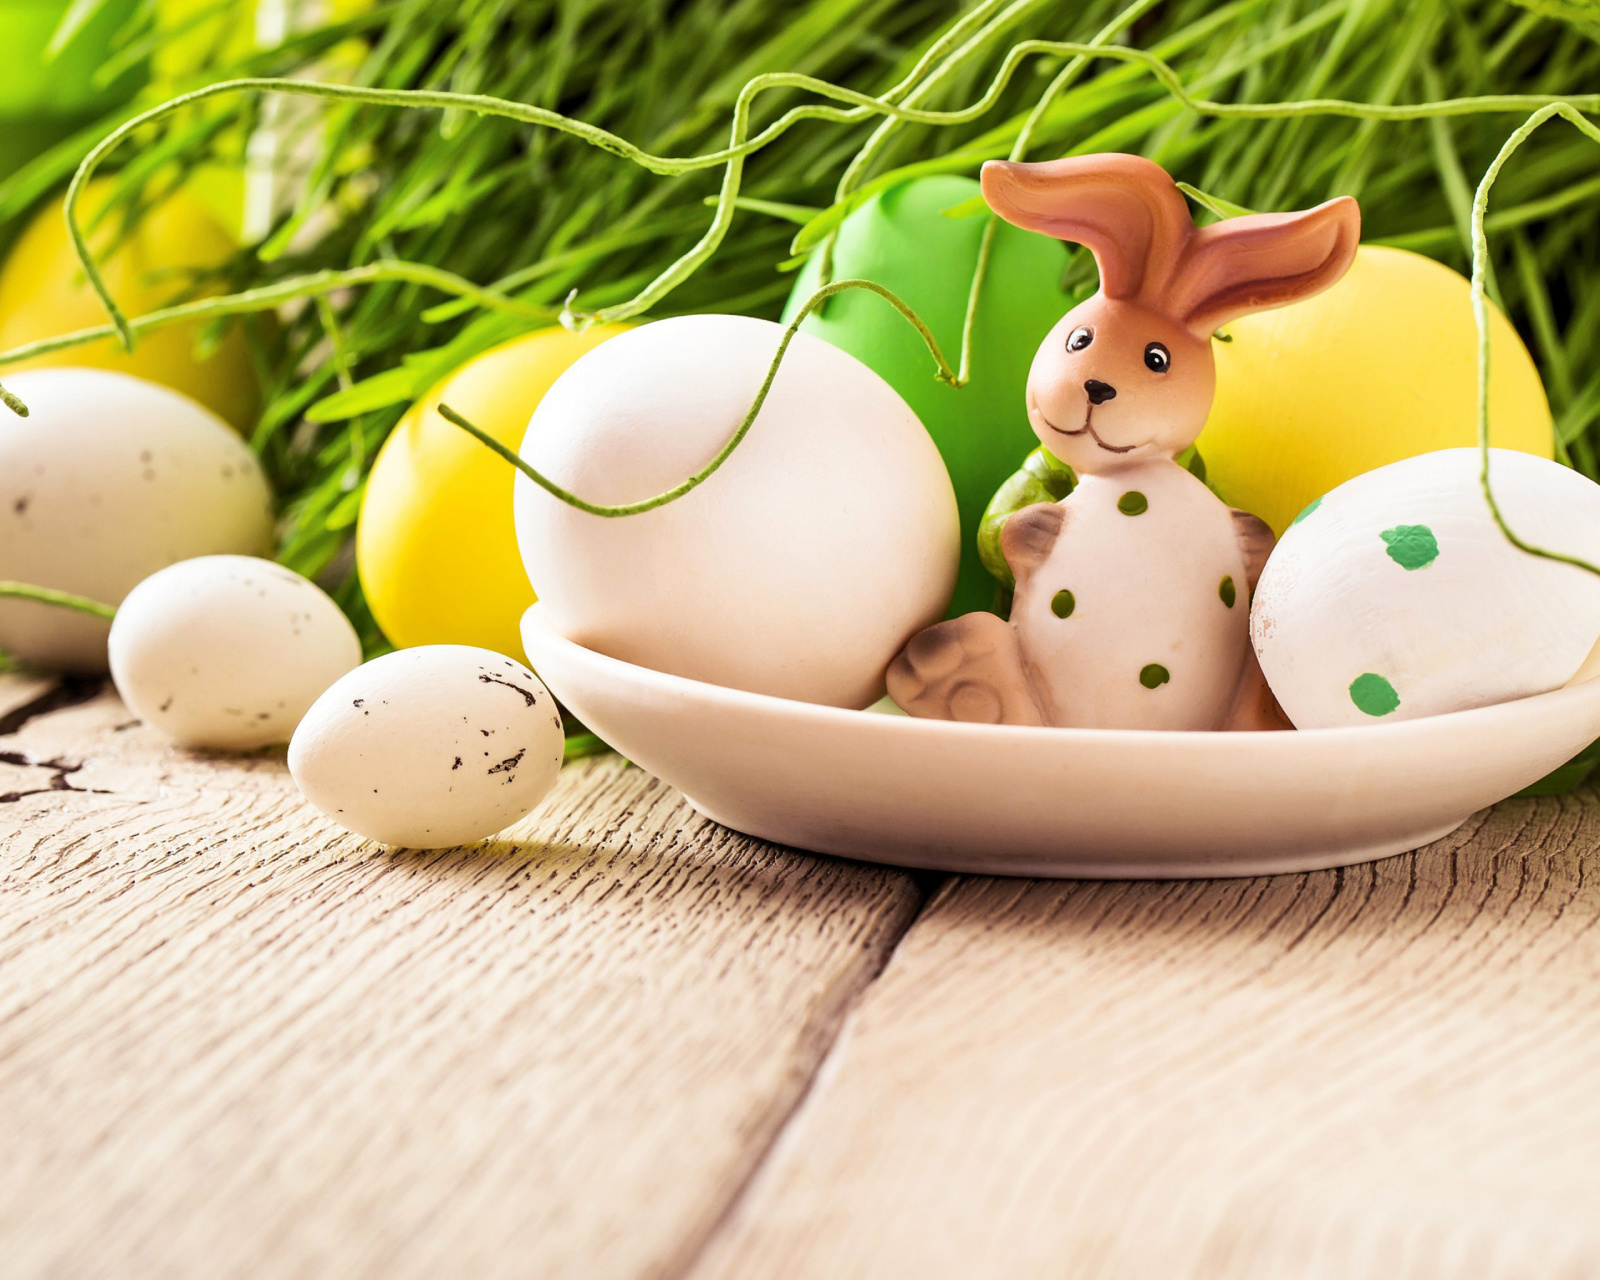 Das Easter still life with hare Wallpaper 1600x1280